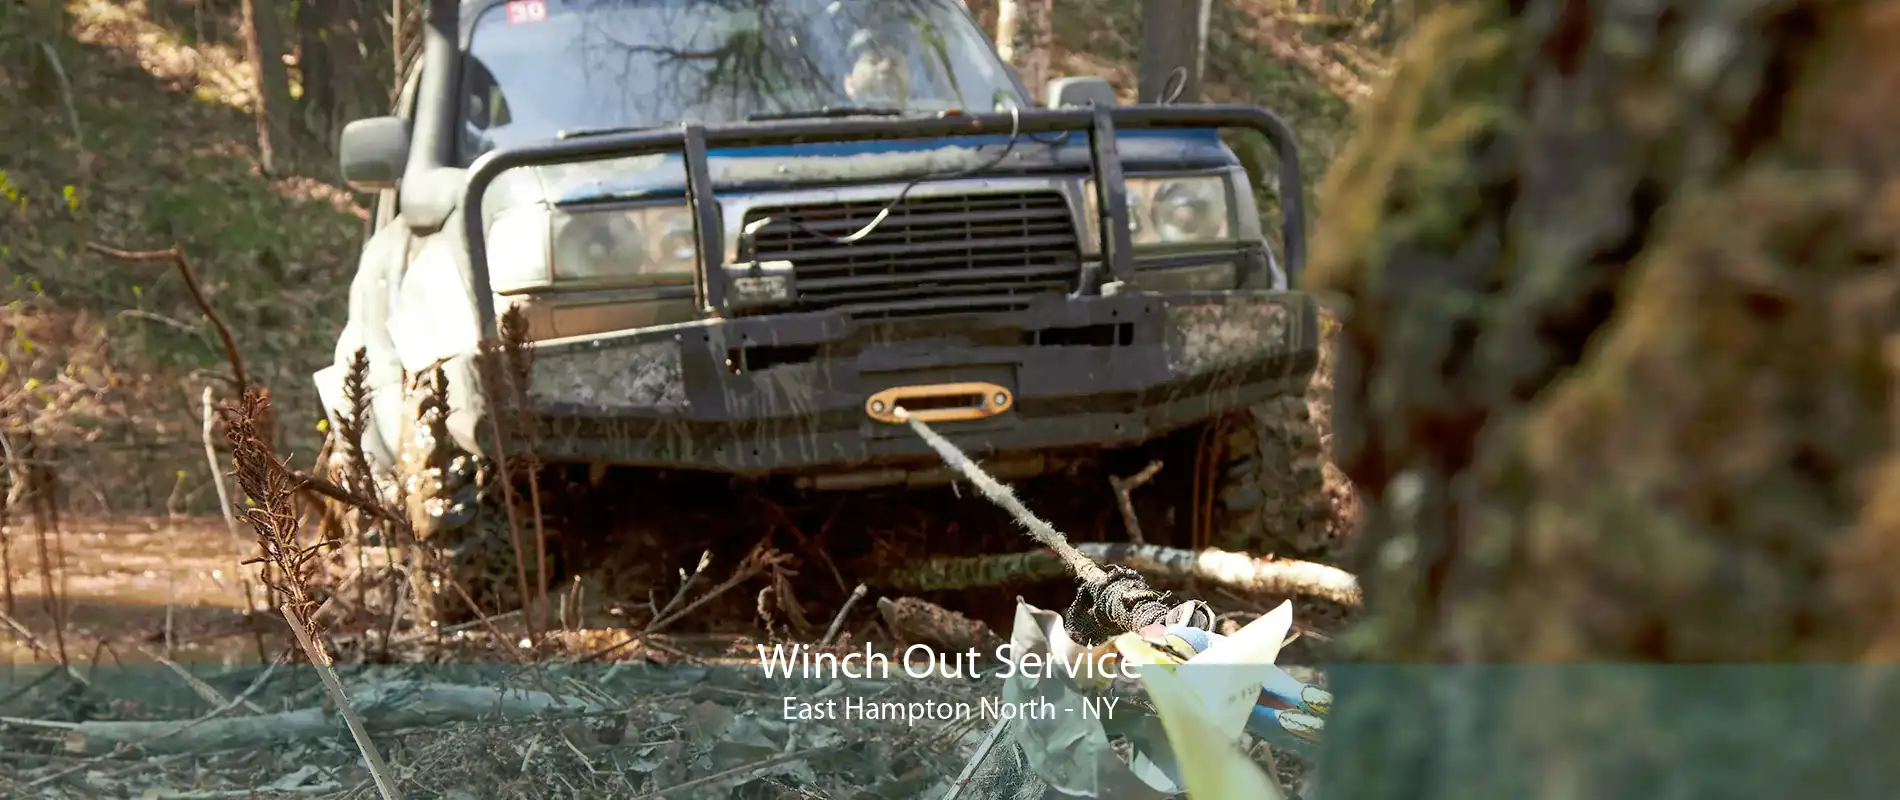 Winch Out Service East Hampton North - NY